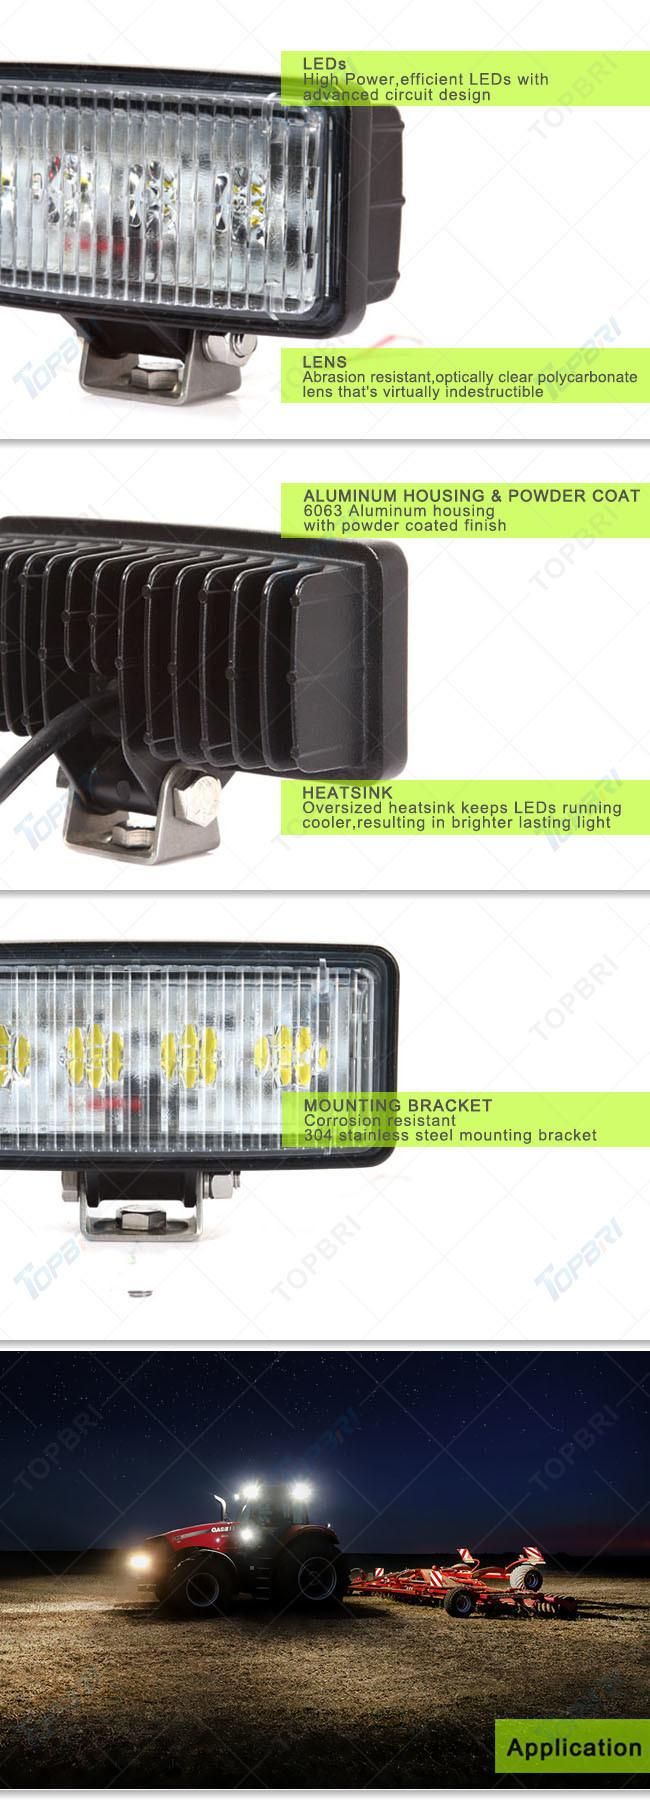 Agricultural Sealed Beam 20W CREE LED Working Work Light for Tractor